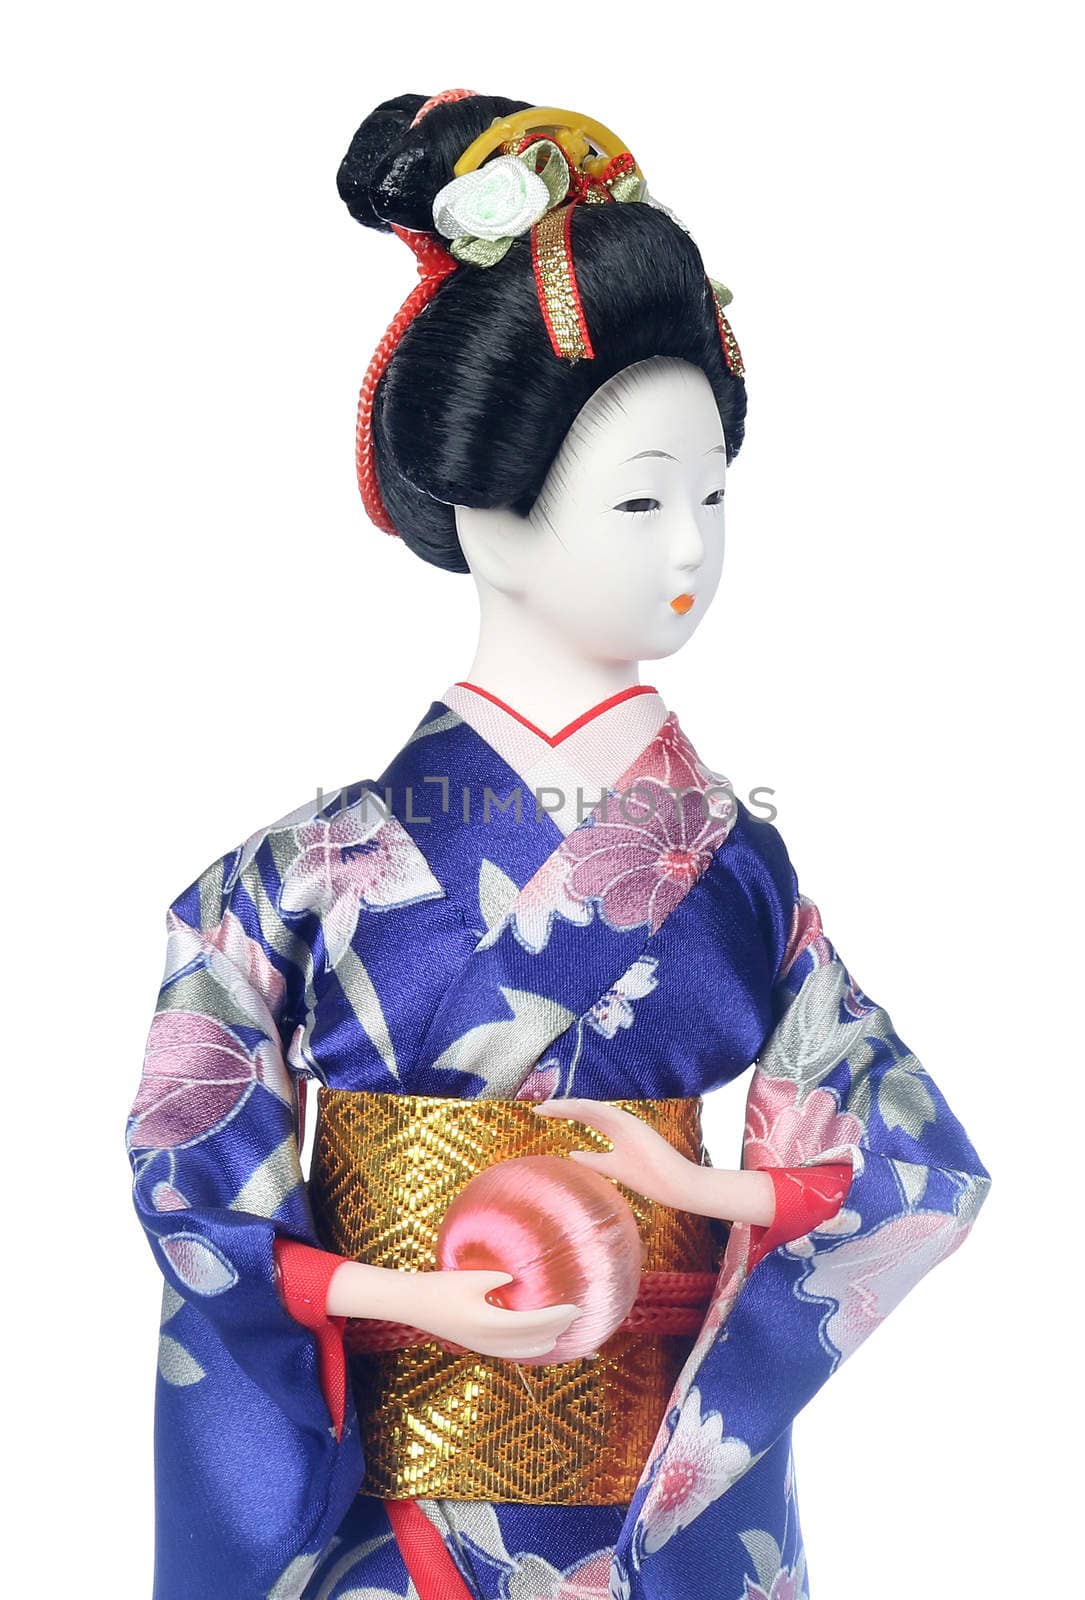 Japanese doll by simpleBE